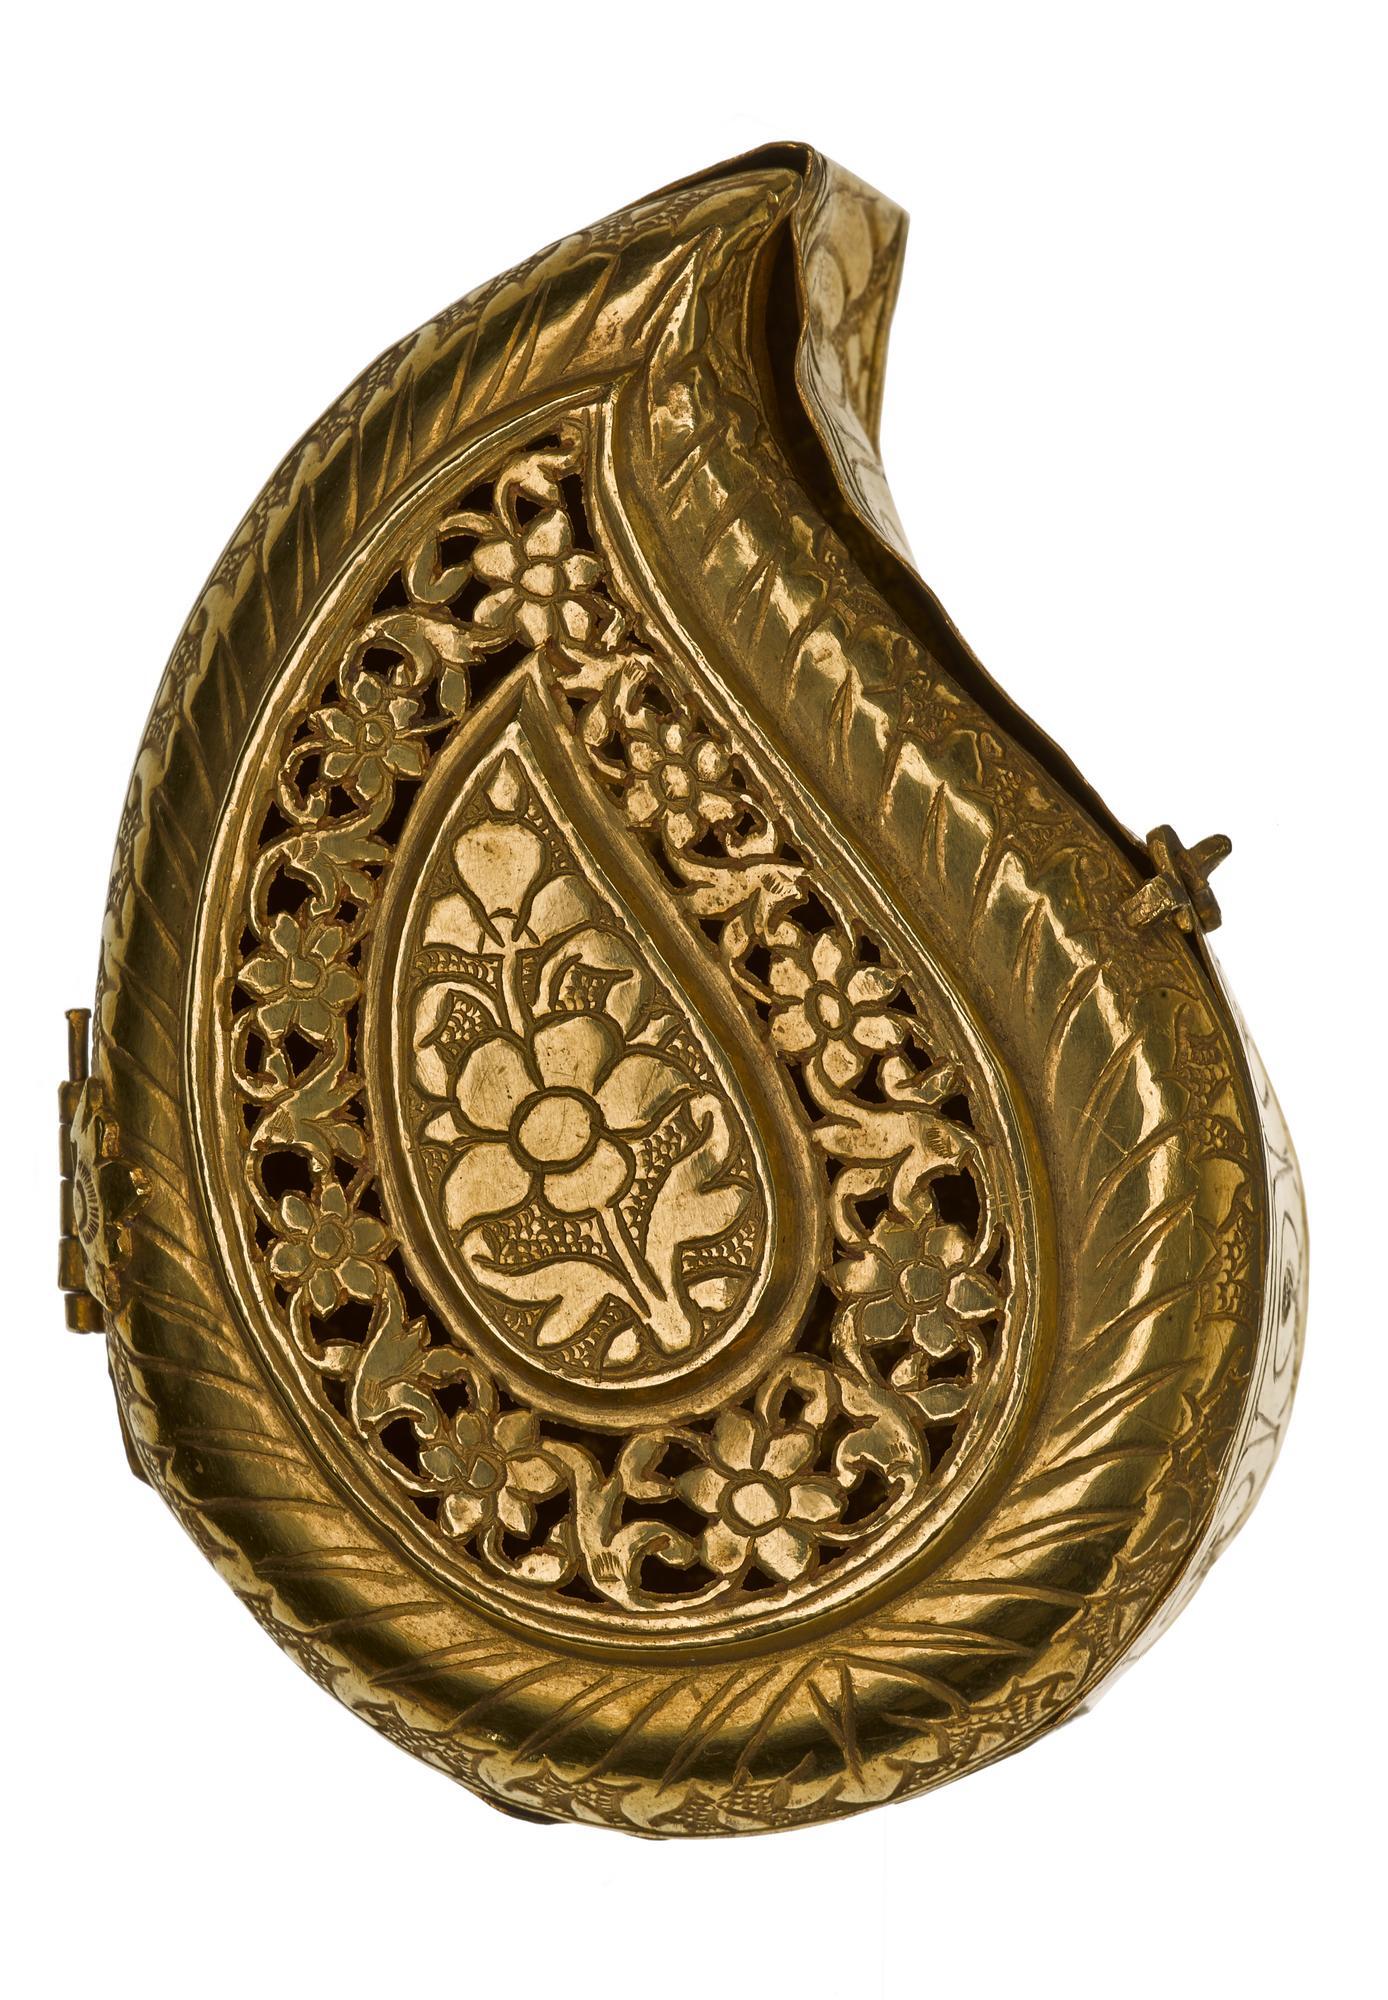 Box of gold for betel (pan-dan), in the shape of a buta, with hinged lid decorated with floral pattern in chased work and open work.